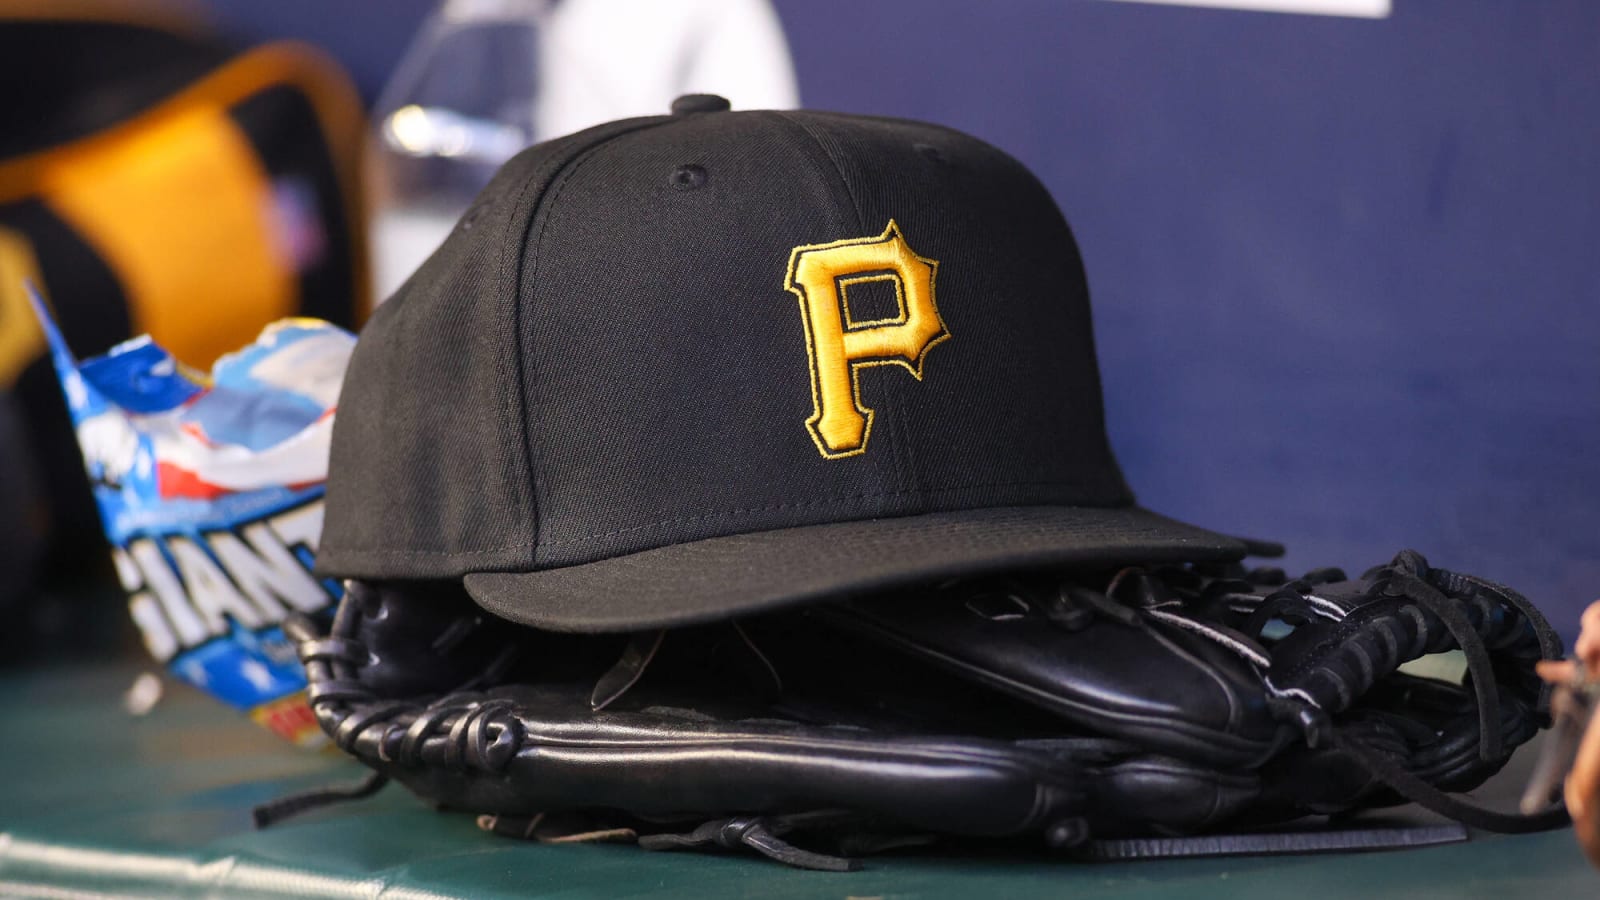 Which prospects should Pirates protect from Rule 5 draft?